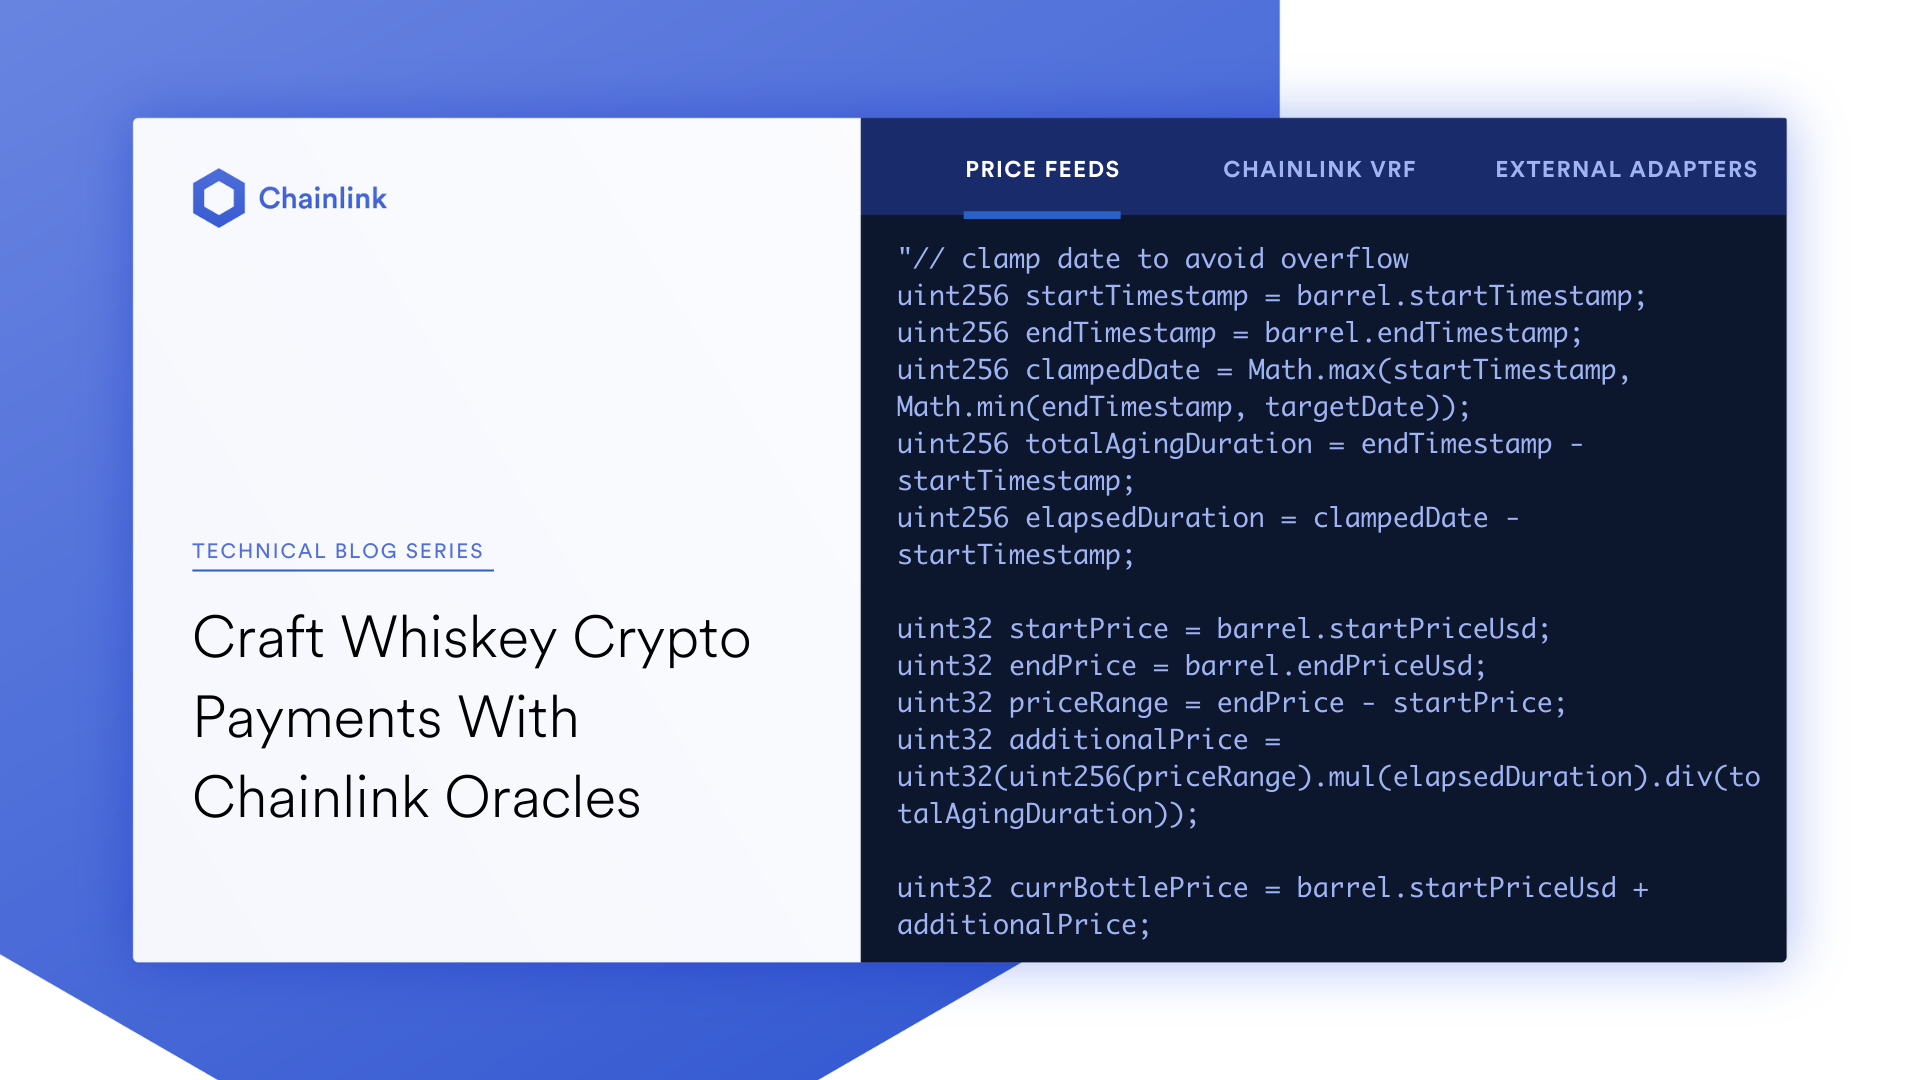 Craft Whiskey Crypto Payments With Chainlink Oracles